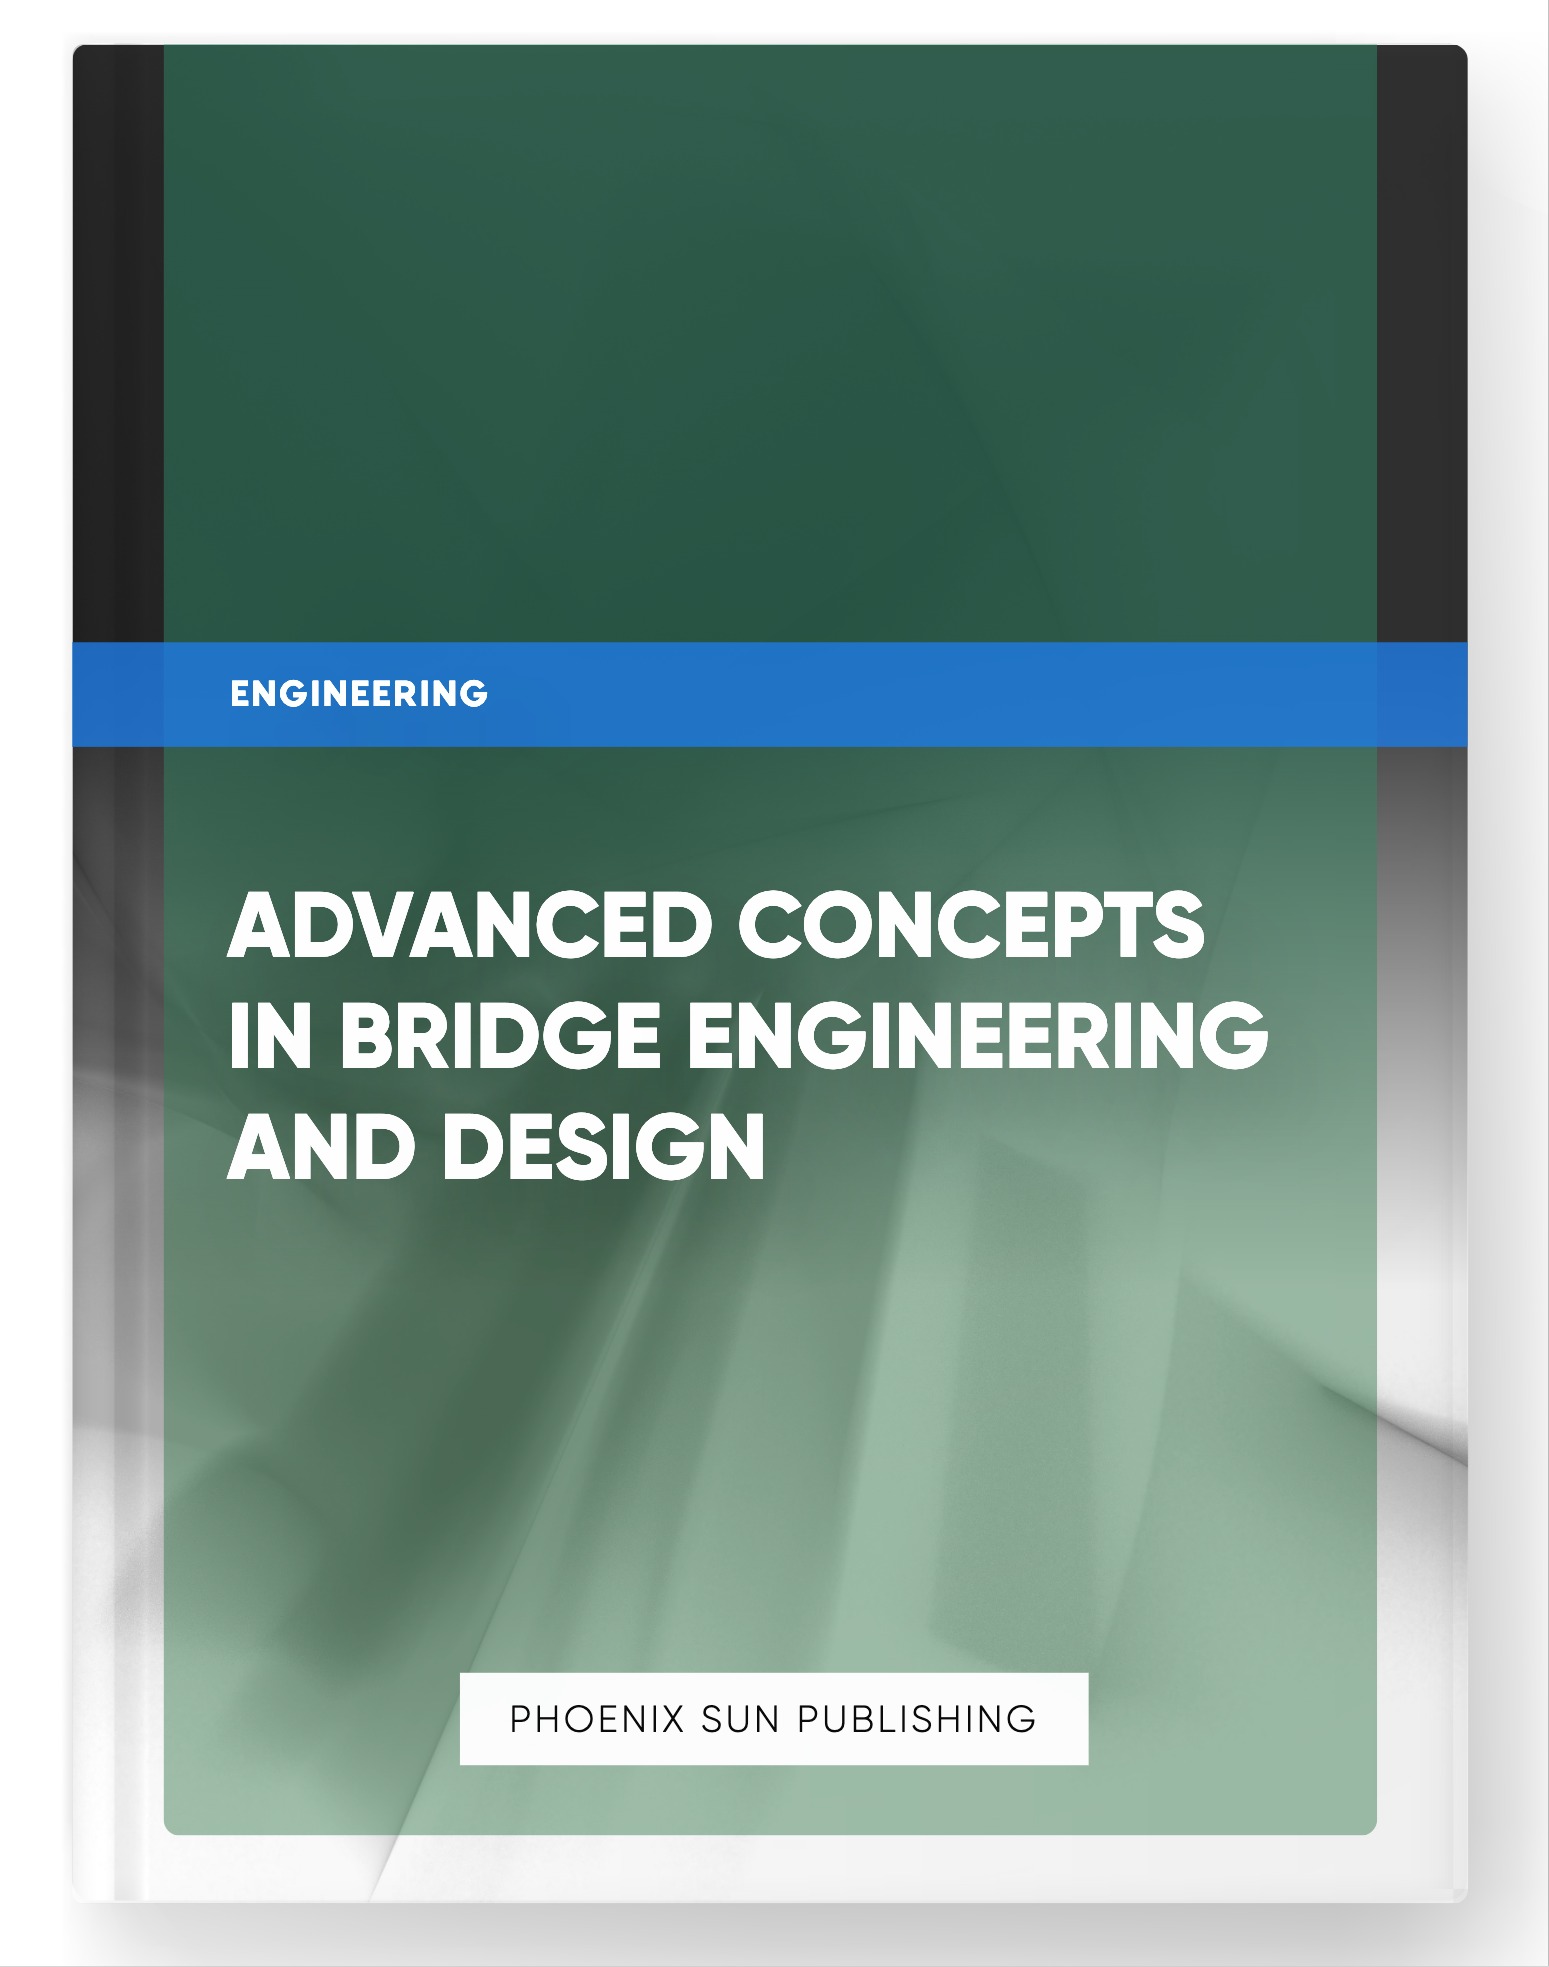 Advanced Concepts in Bridge Engineering and Design